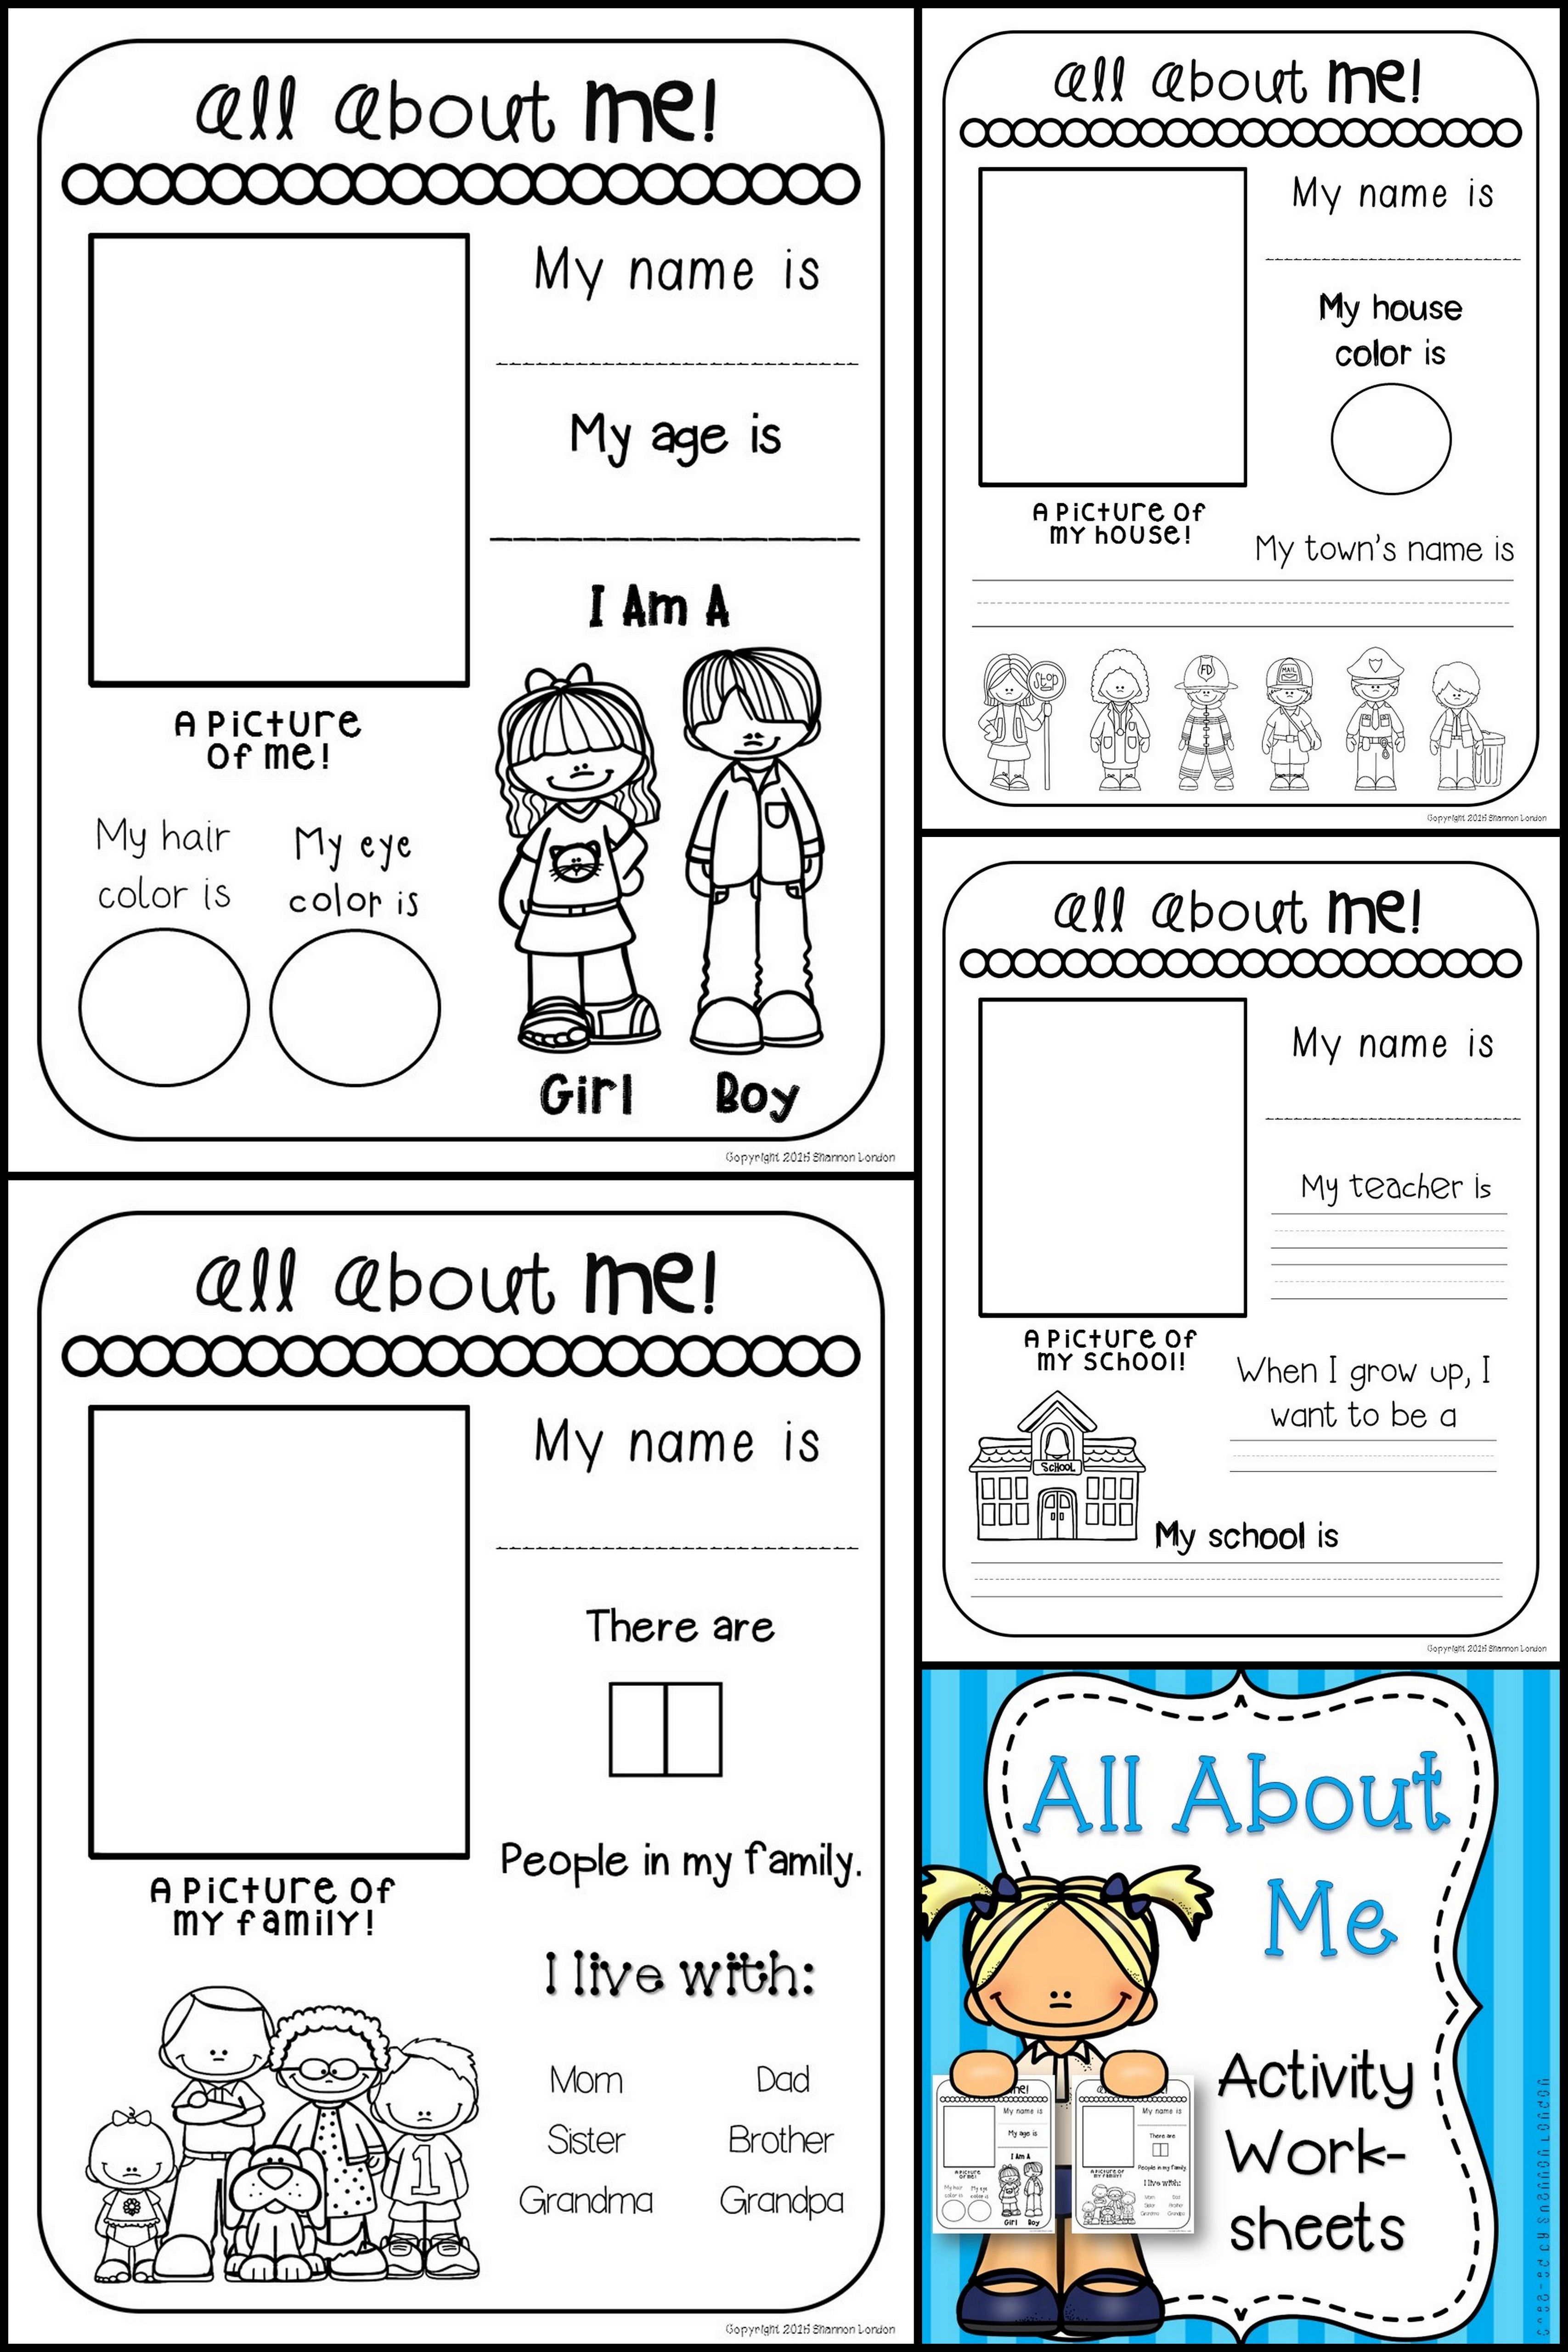 50 All About Me Worksheet 6